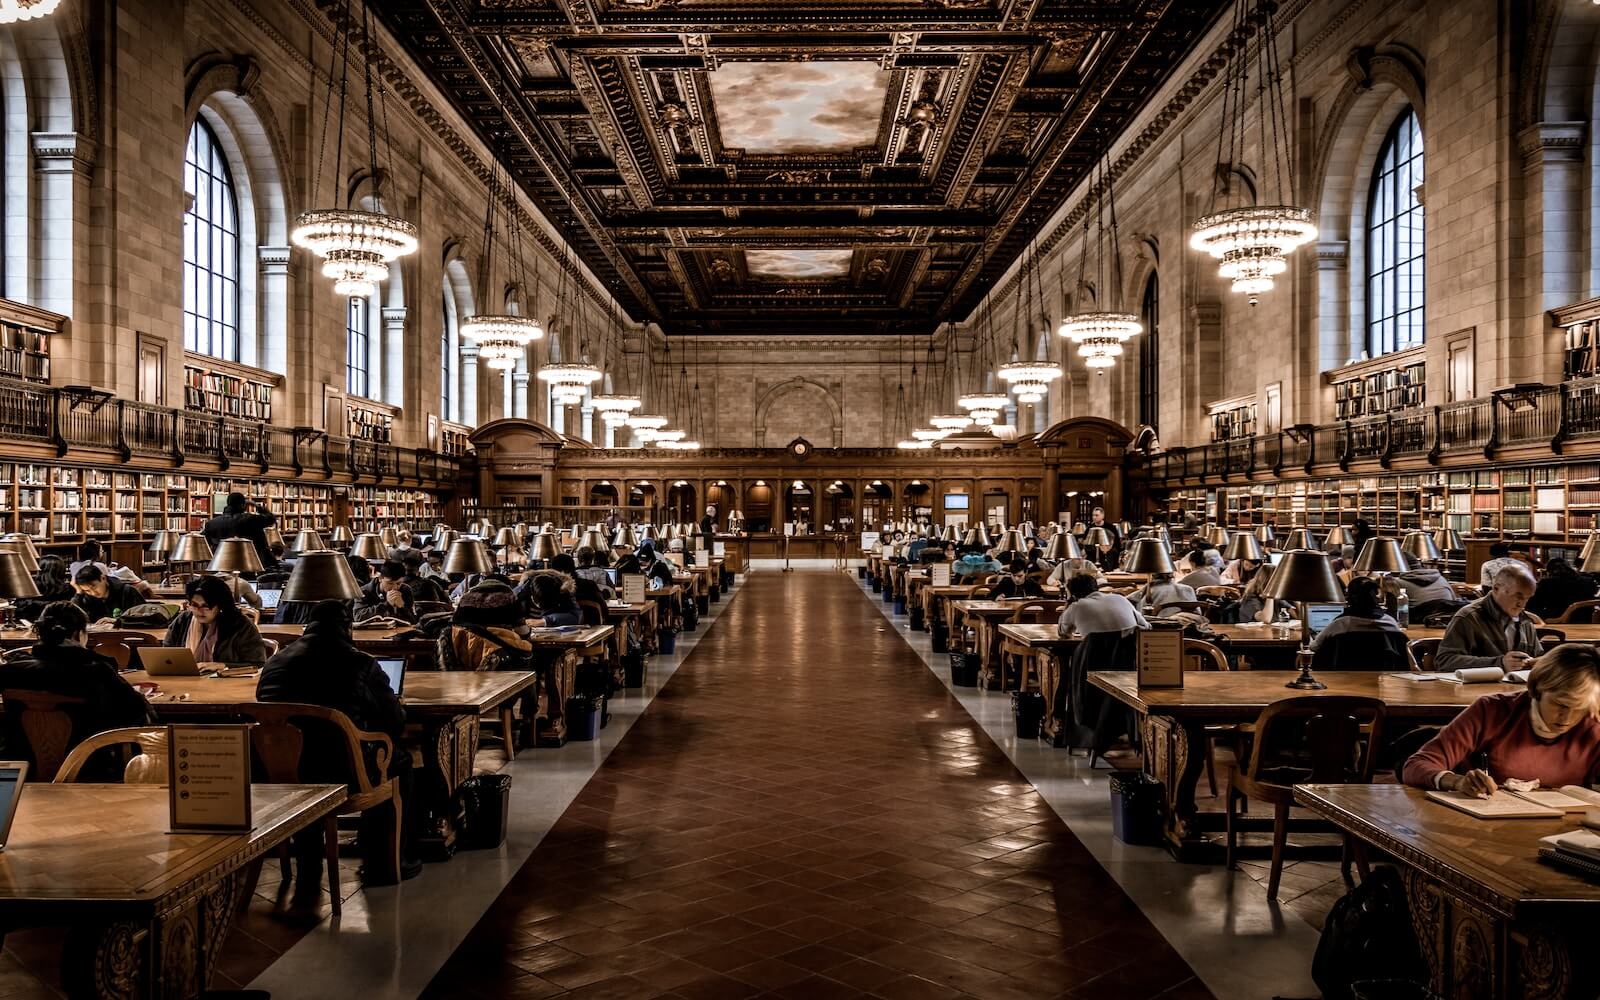 The Rose Main Reading Room at the Stephen A. Schwarzman Building